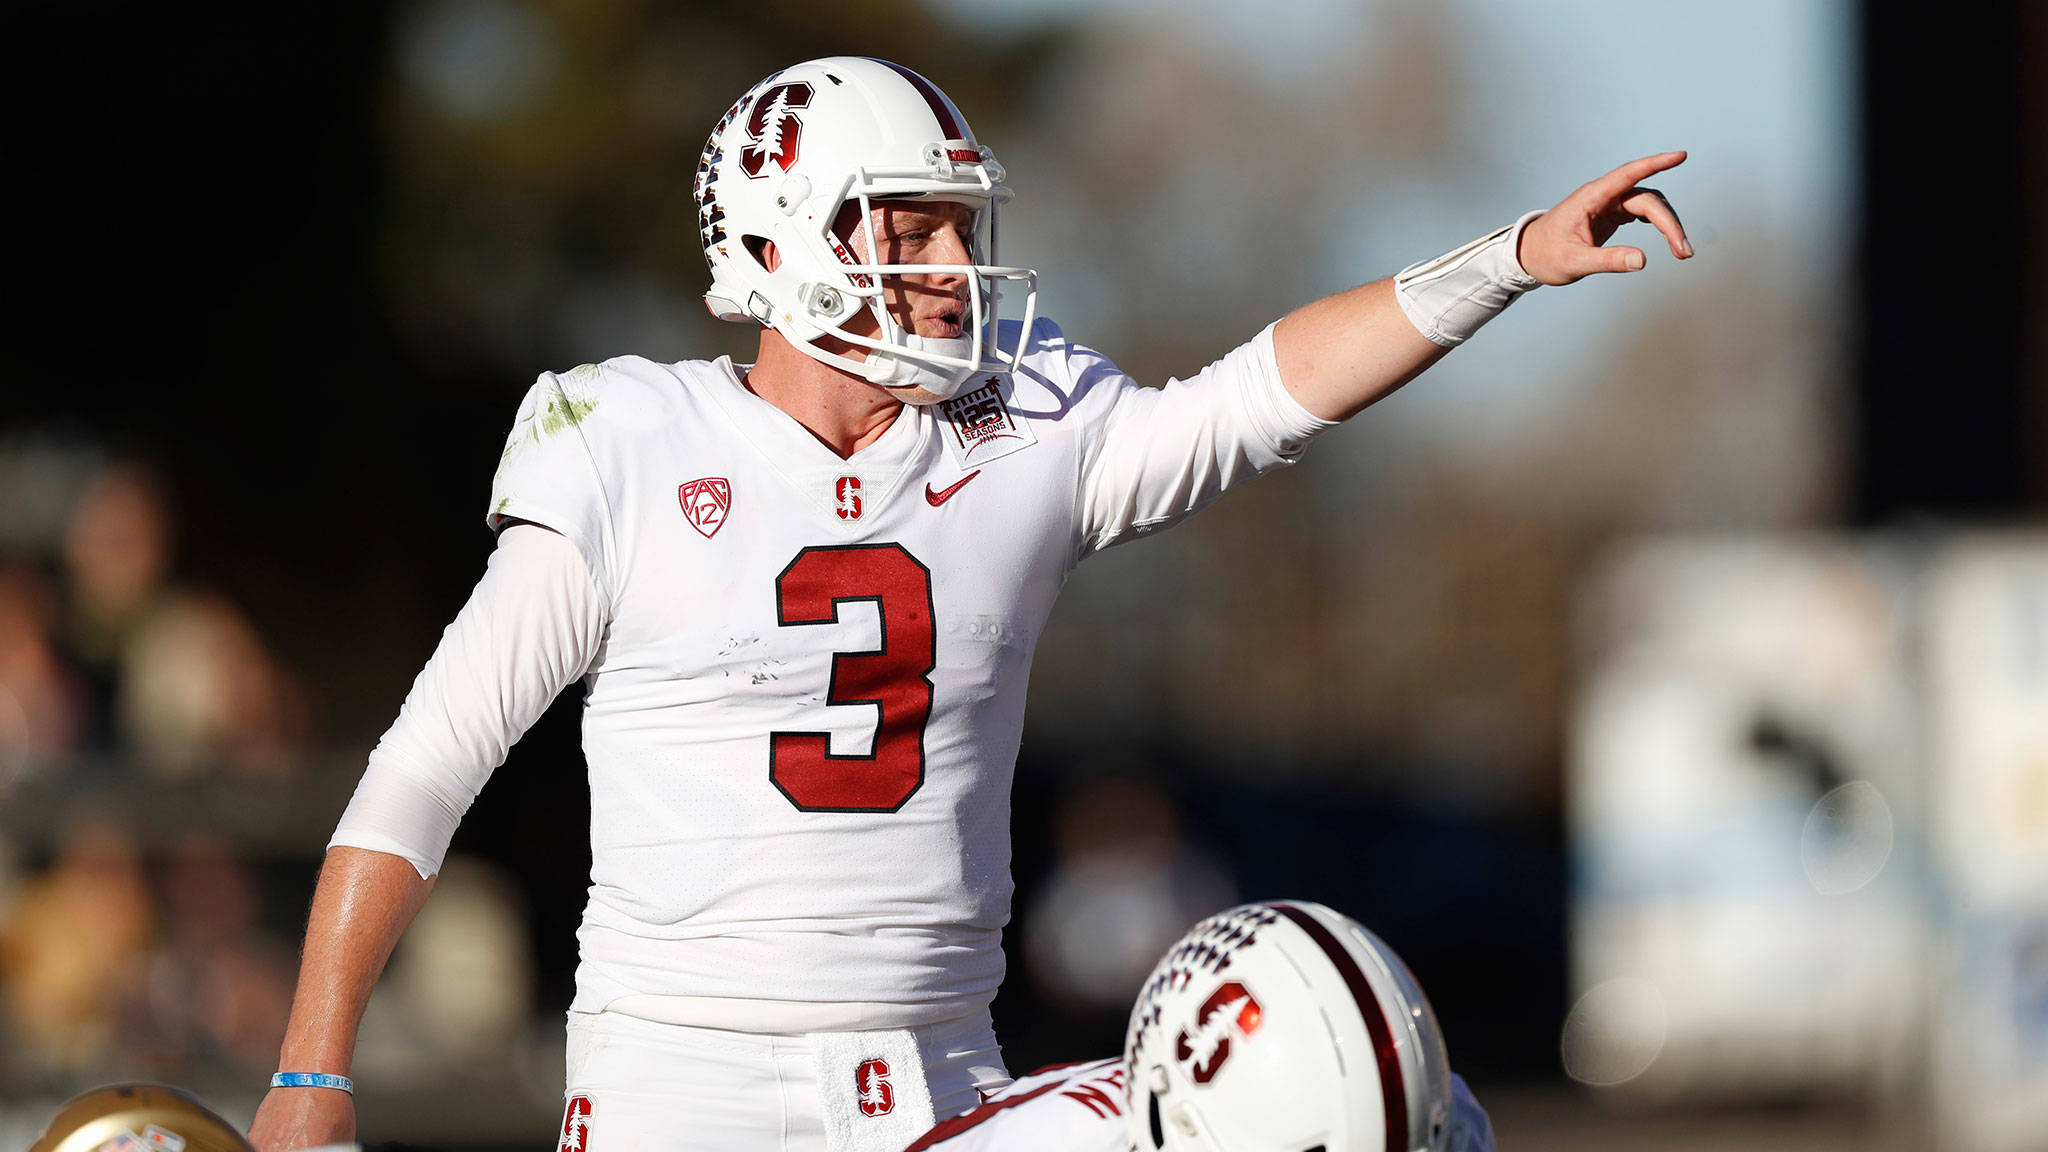 Stanford quarterback K.J. Costello (3) calls out the defense during the second half of a game against Colorado on Nov. 9, 2019, in Boulder, Colo. (AP Photo/David Zalubowski)